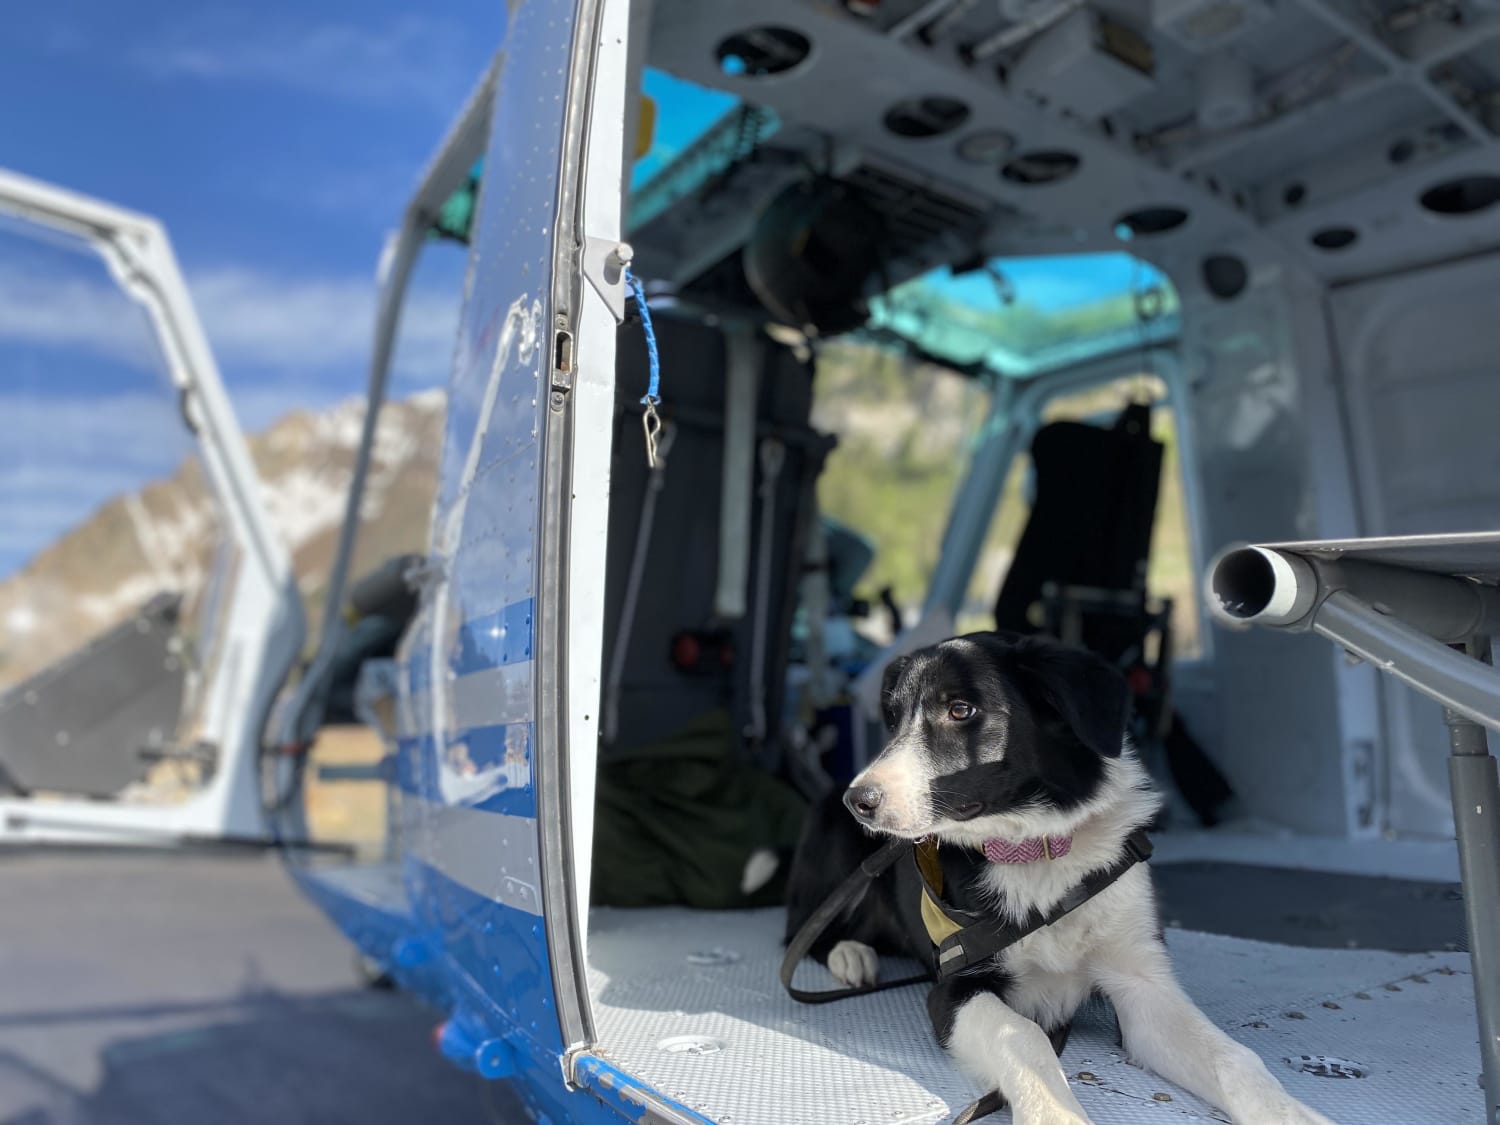 Mabel is being trained for avalanche rescue, we had her first helicopter experience today